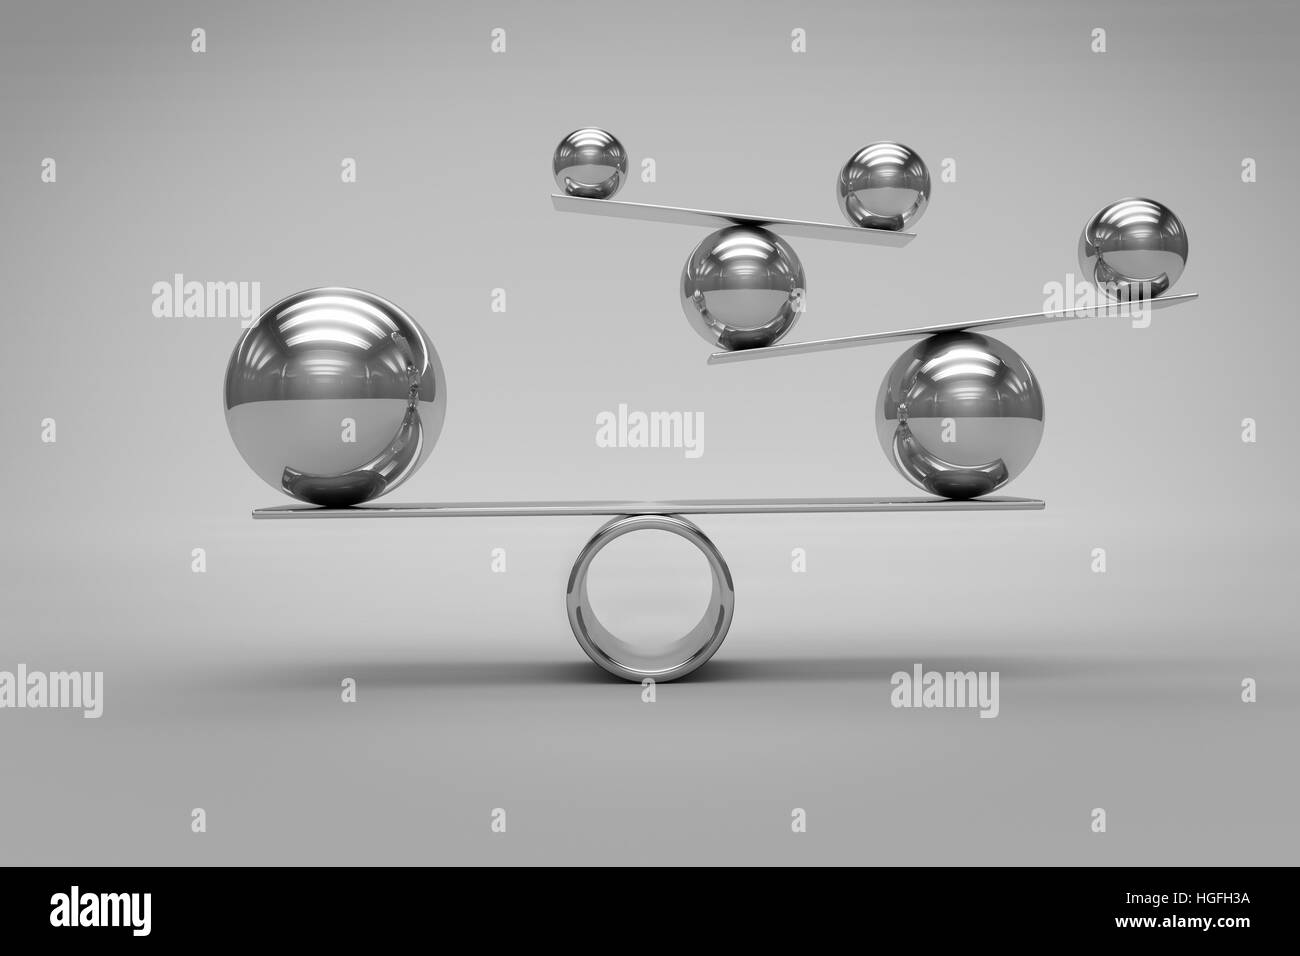 Balance scales Black and White Stock Photos & Images - Alamy